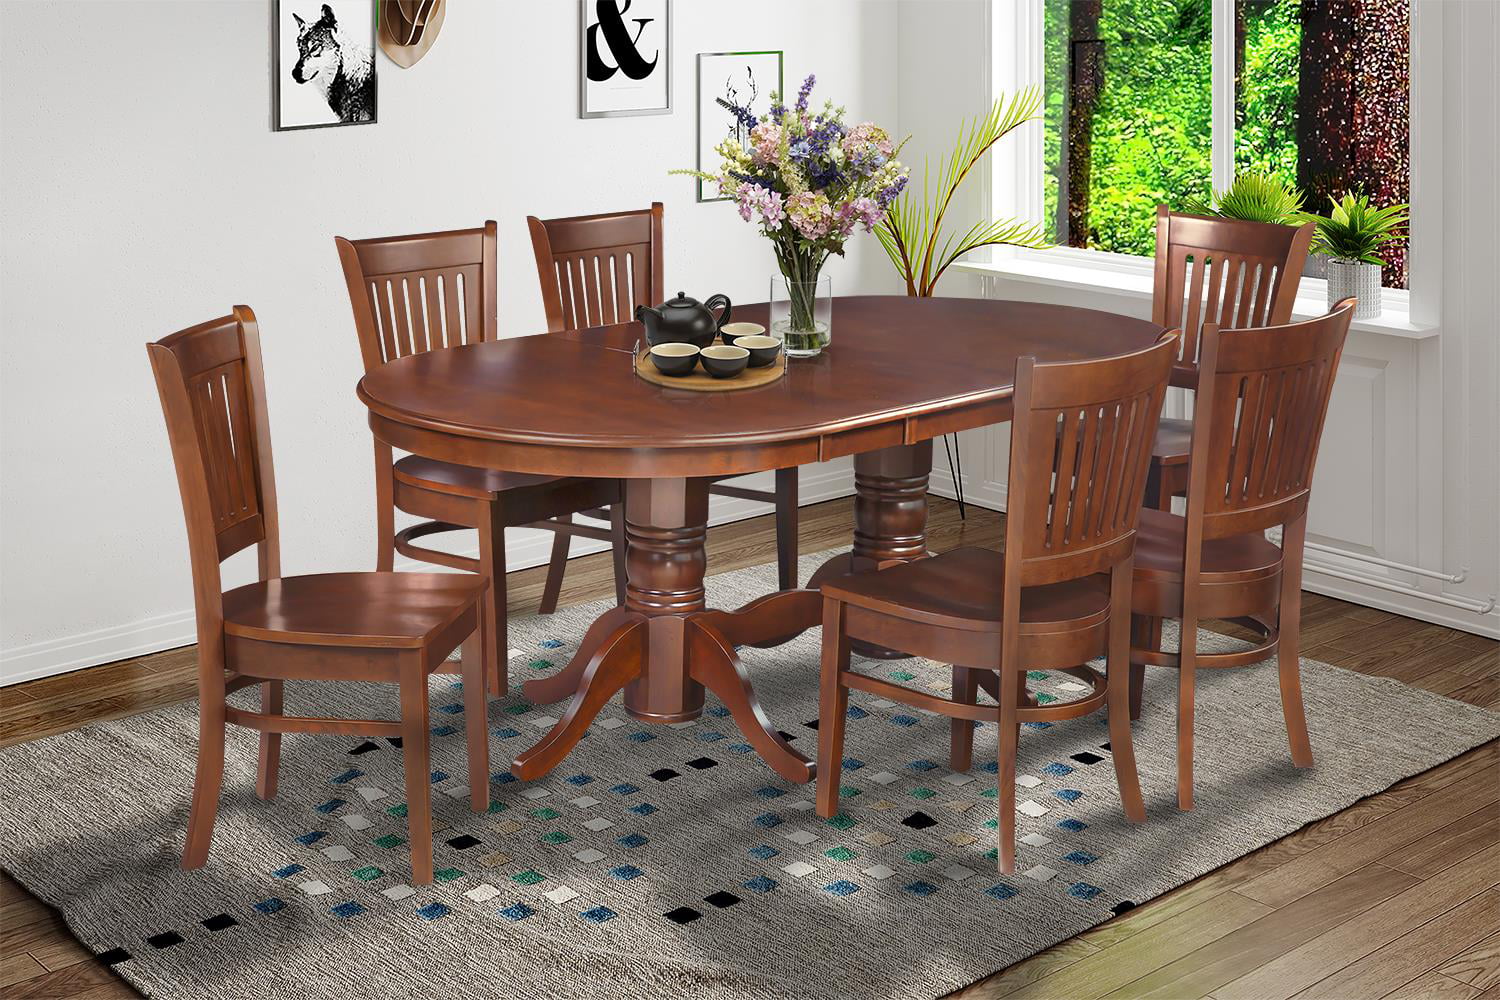 7 Piece Dining Room Set With Leaf